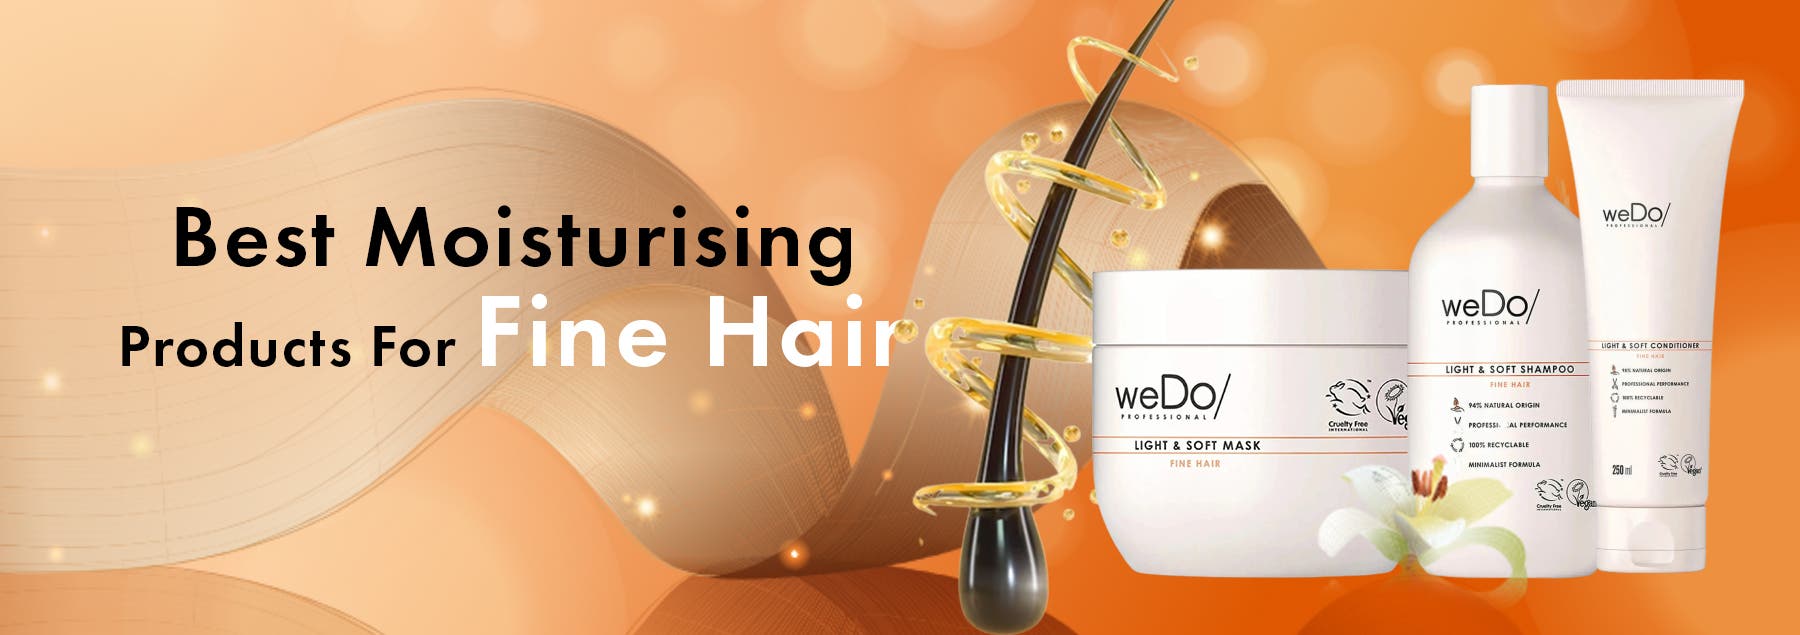 Best Moisturising Products For Fine Hair